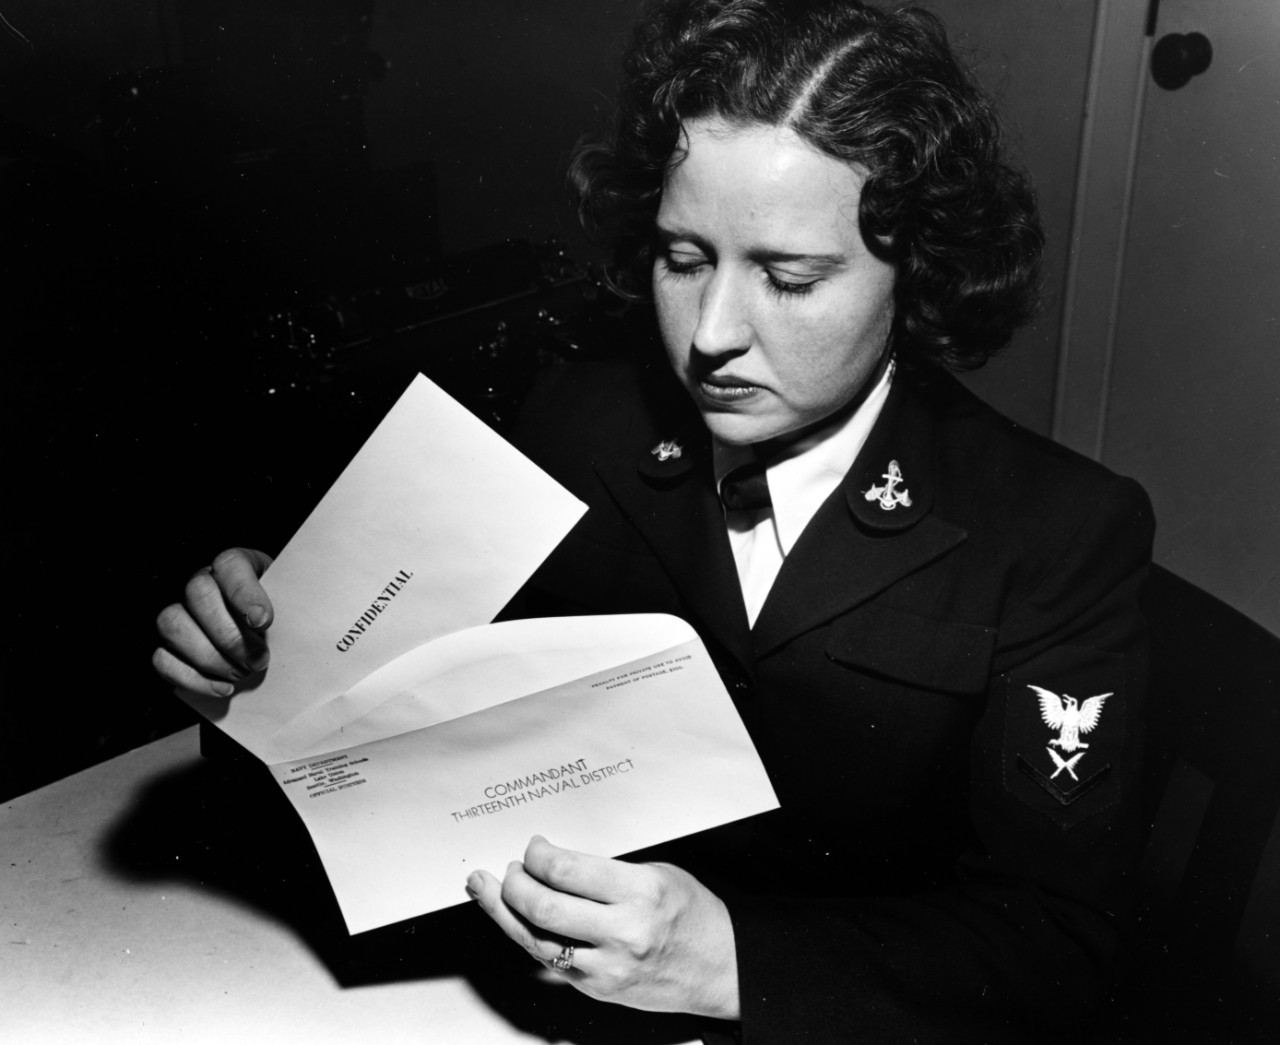 80-G-211166 :  Yeoman 3rd class Ida Sykes, USNR, September 1943.   Places a Confidential letter in its outer envelope, in an office at the Advanced Naval Training Station, Lake Union, Seattle, Washington, 1 September 1943. The envelope is addressed to the Commandant, Thirteenth Naval District. Official U.S. Navy Photograph, now in the collections of the National Archives.   